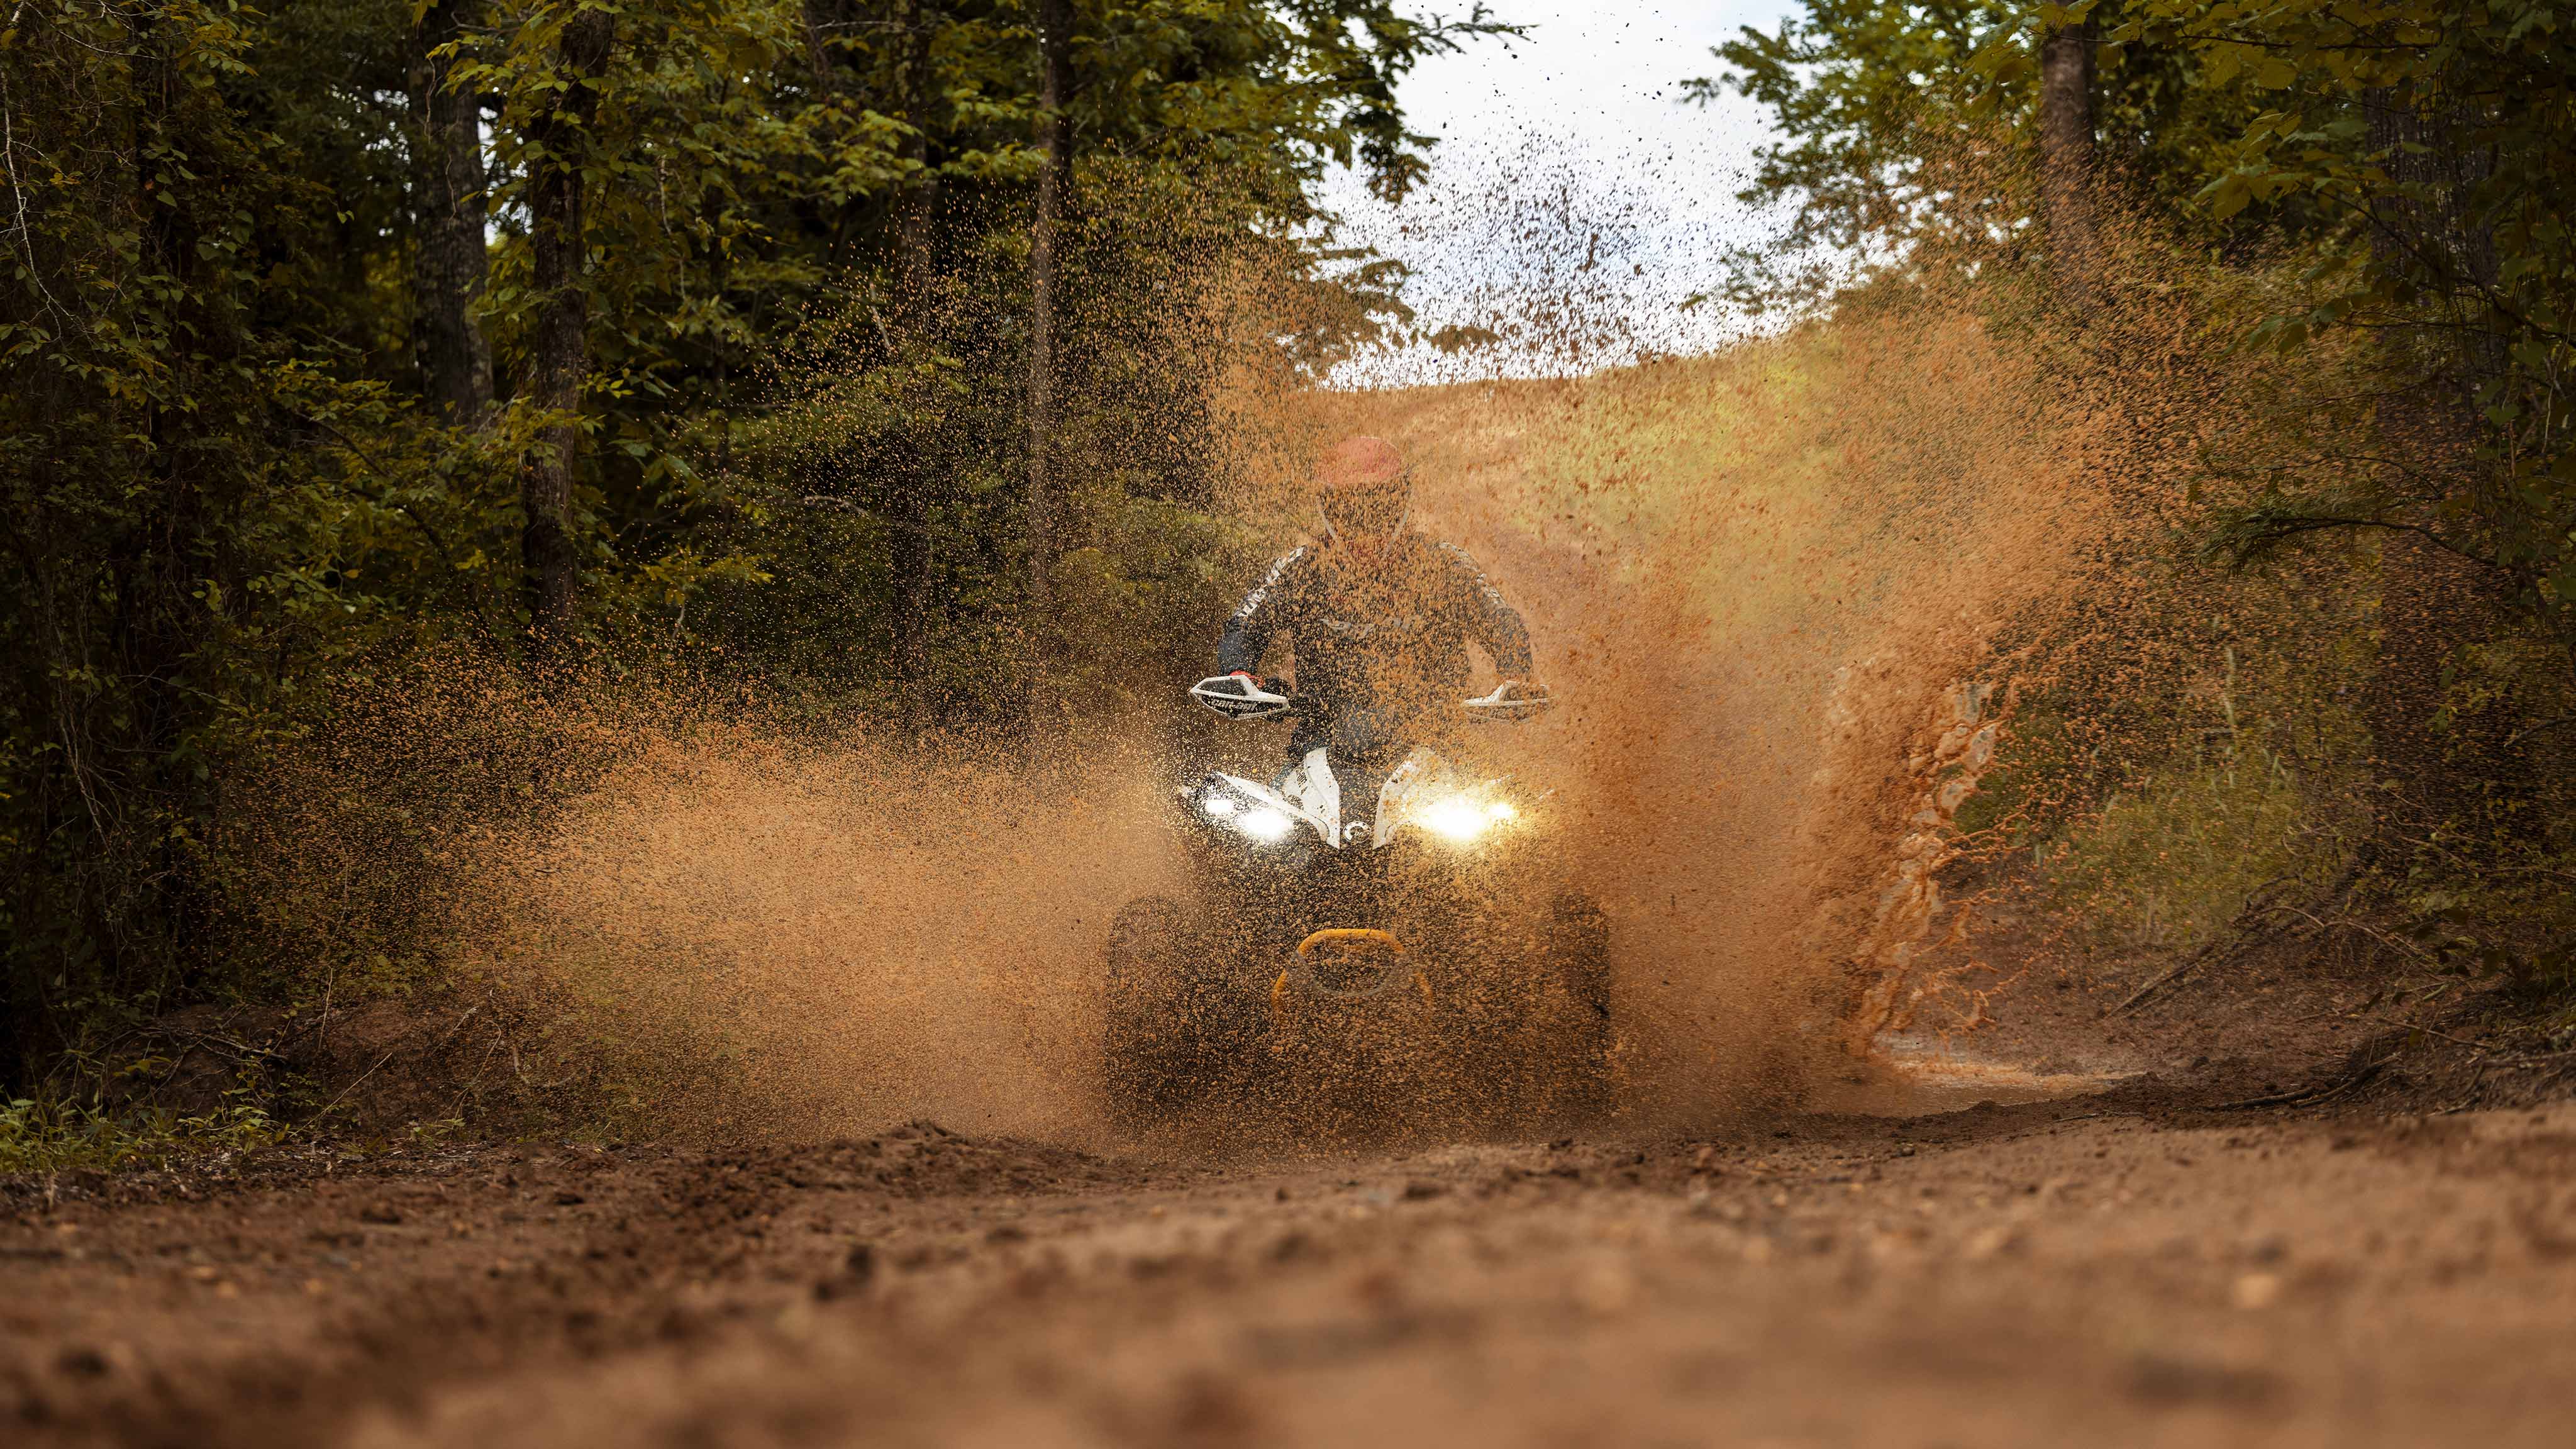 Can-Am Renegade ATV speeding on a forest trail